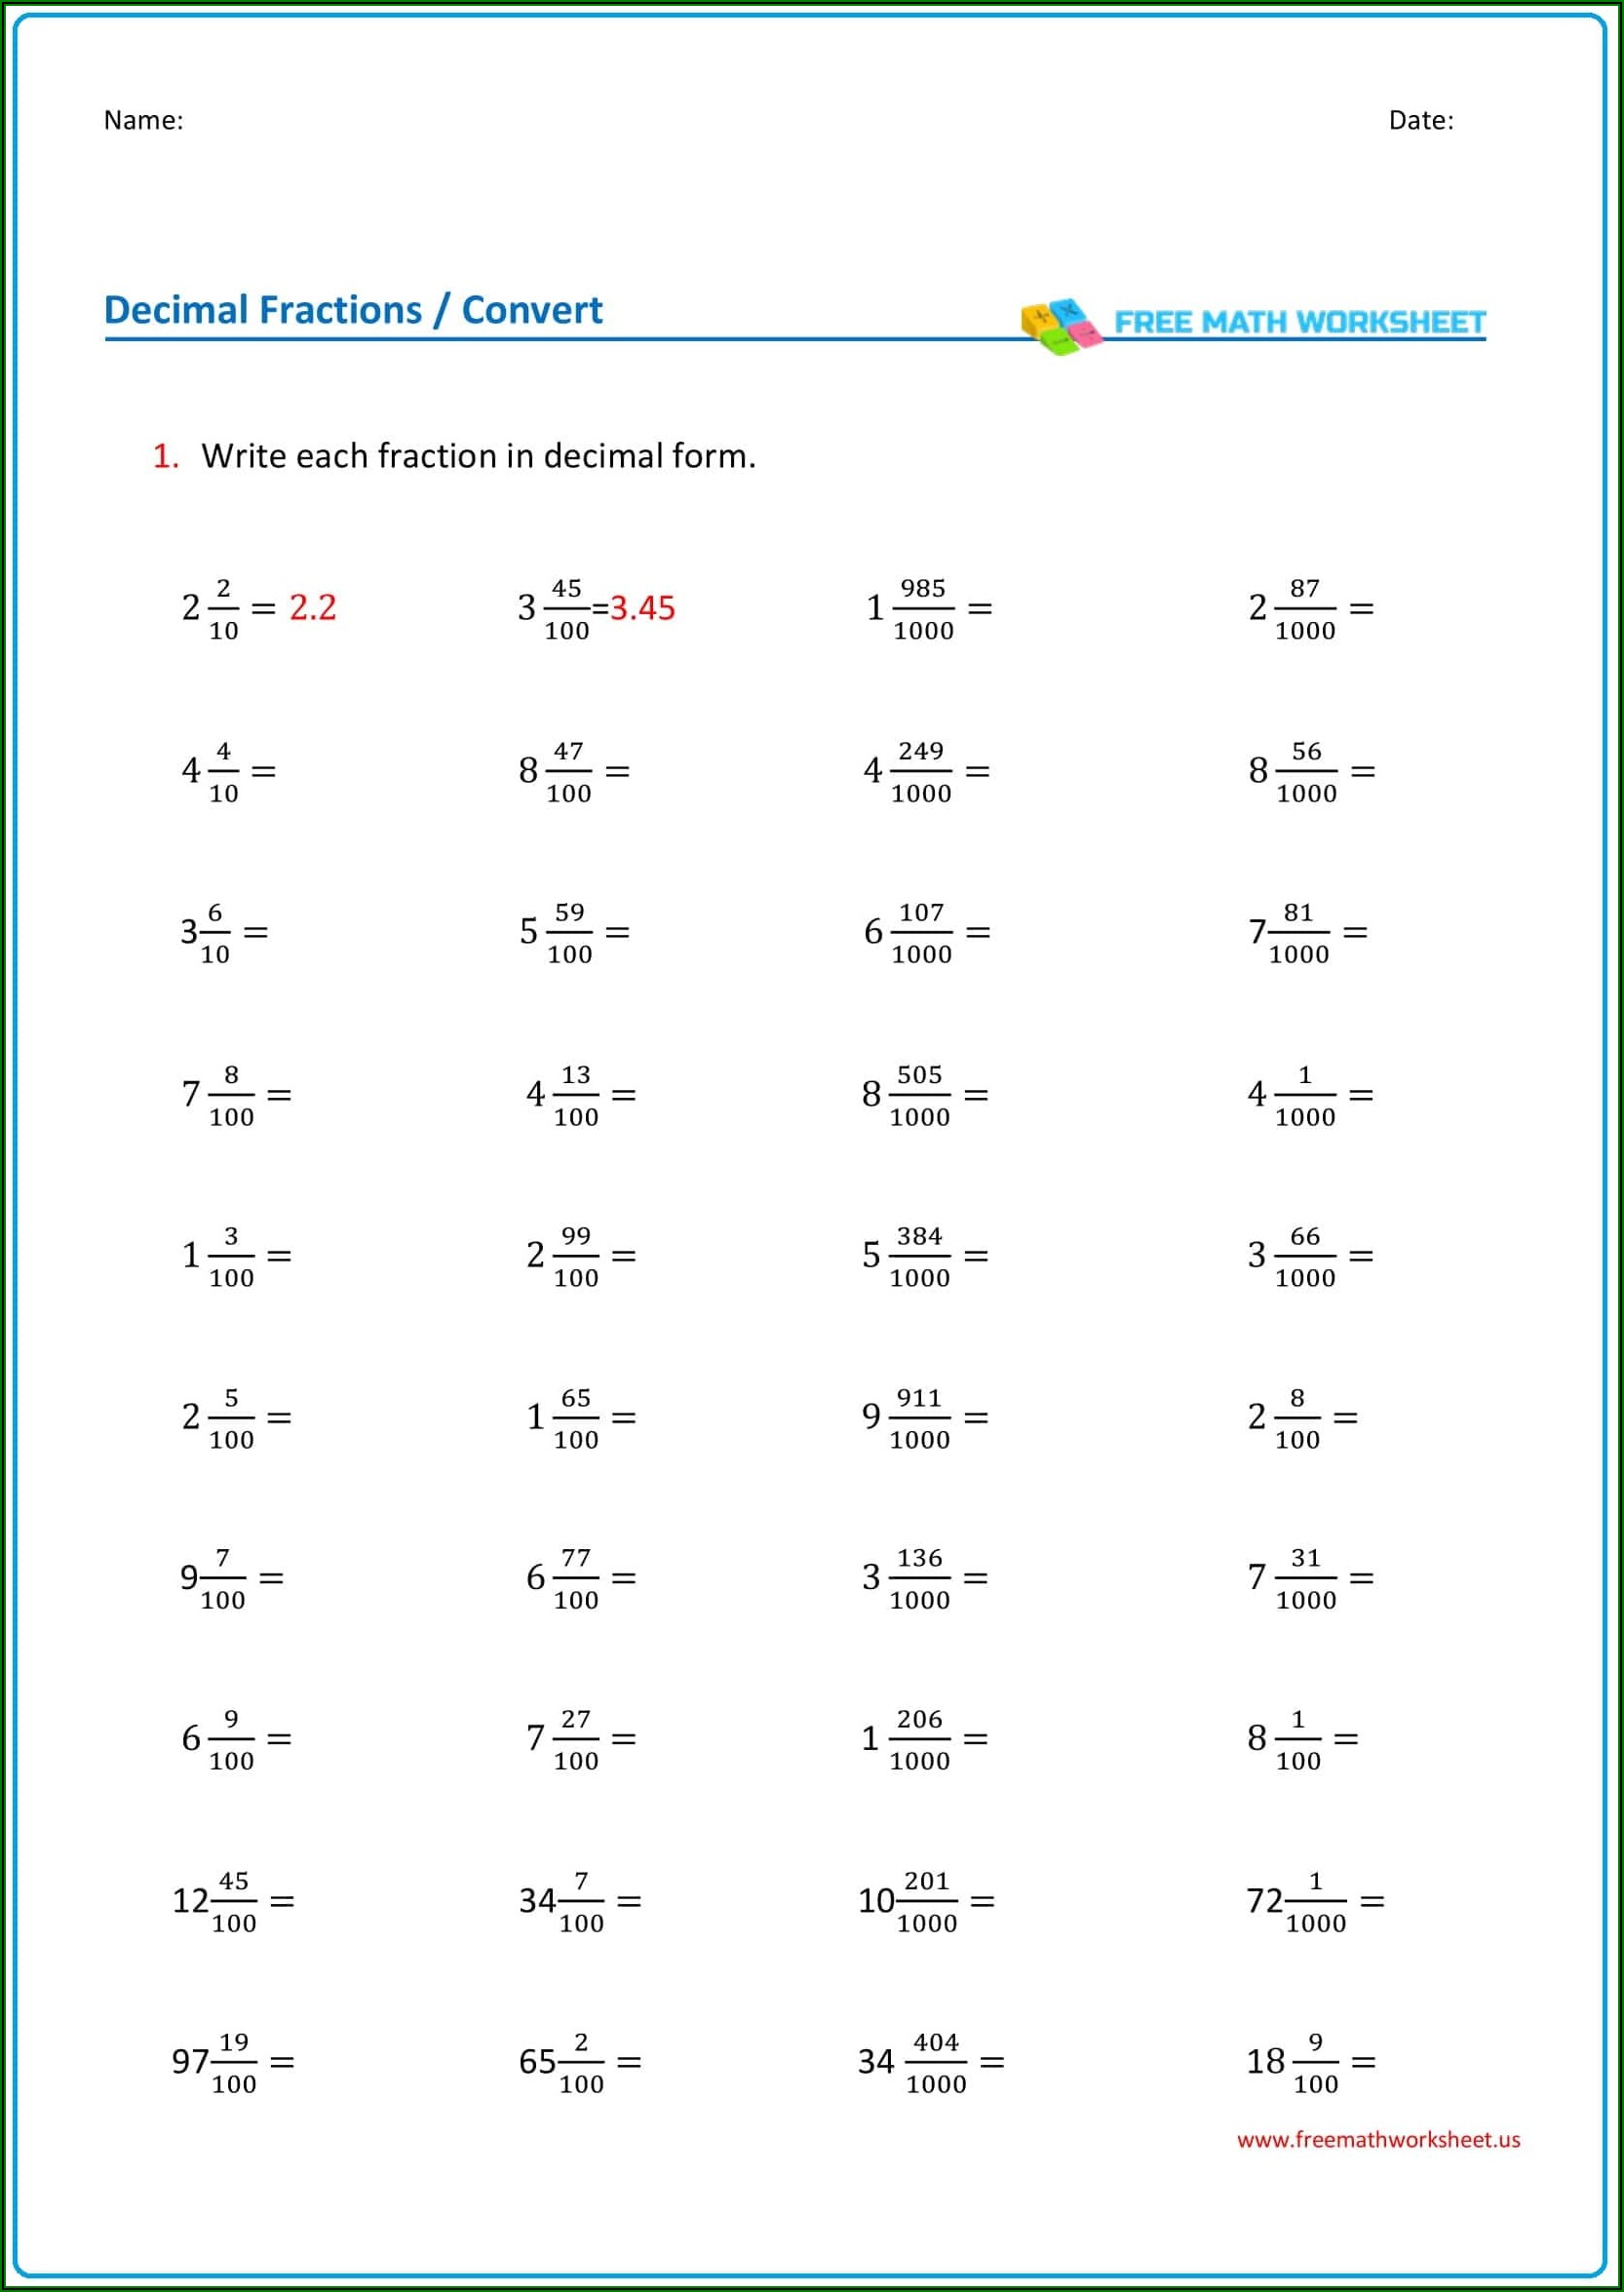 Worksheet On Converting Fractions To Decimals Pdf